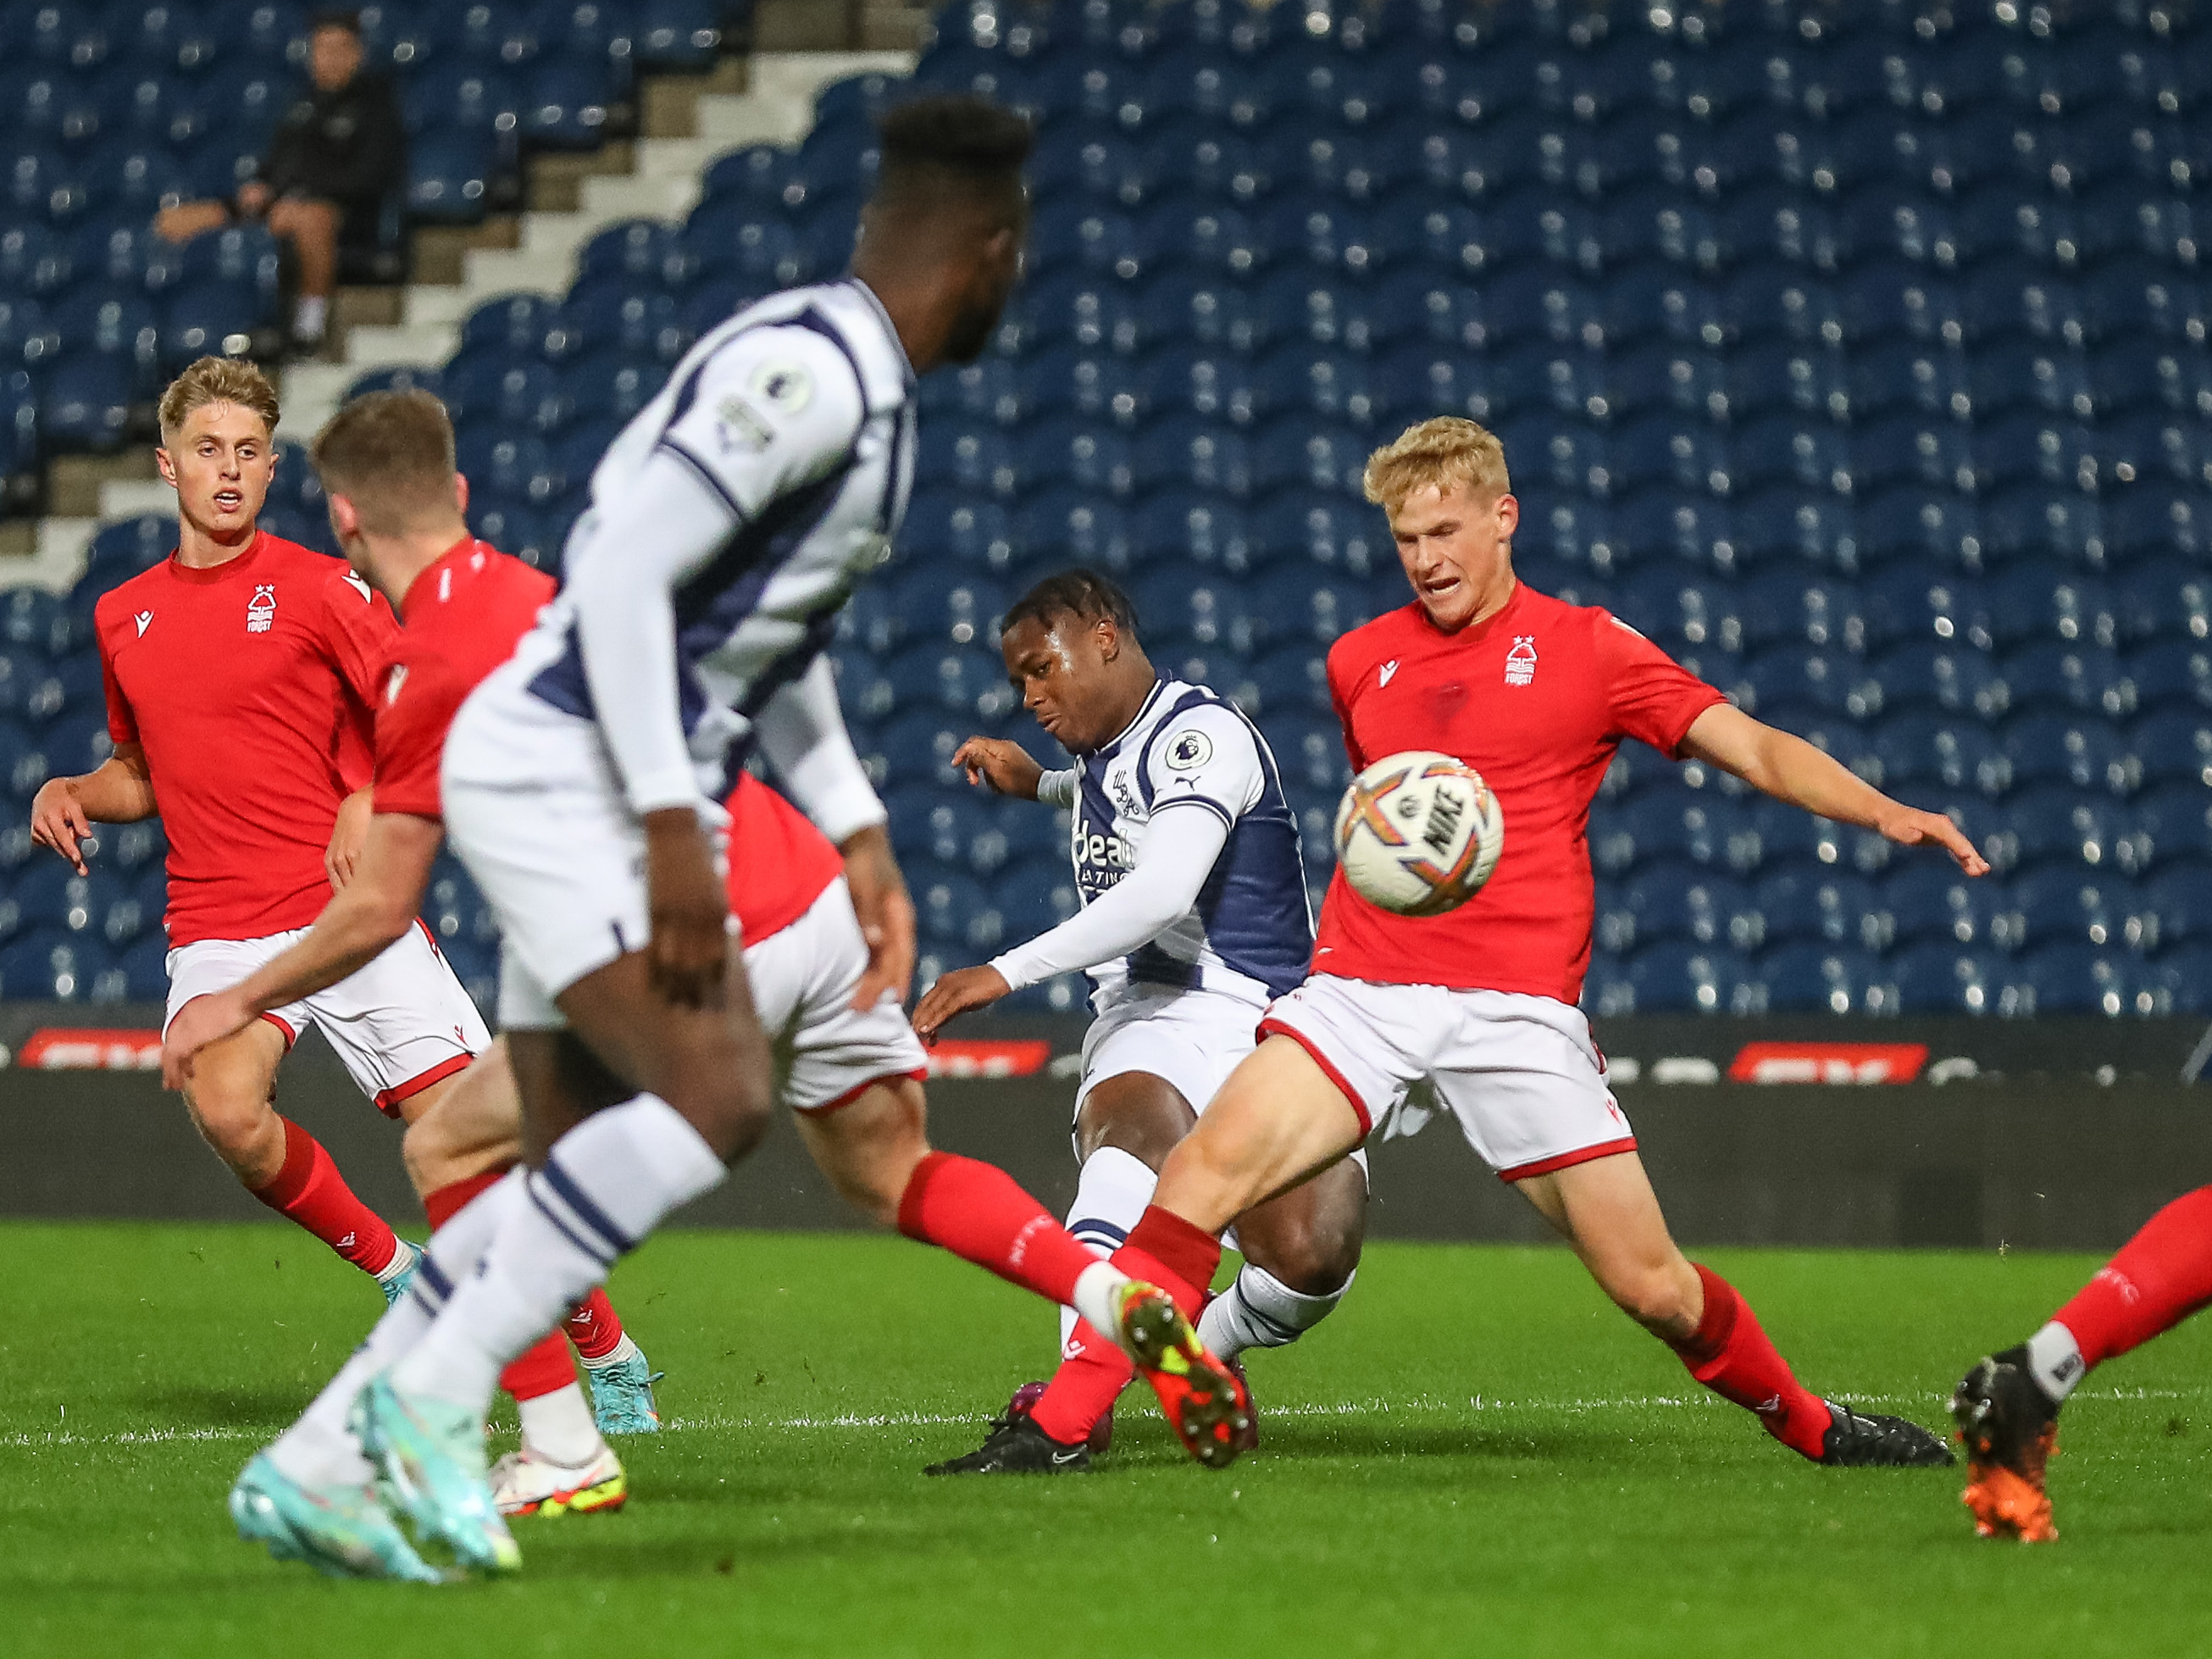 An image of Reyes Cleary attempting a curling shot against Nottingham Forest's Under-21s